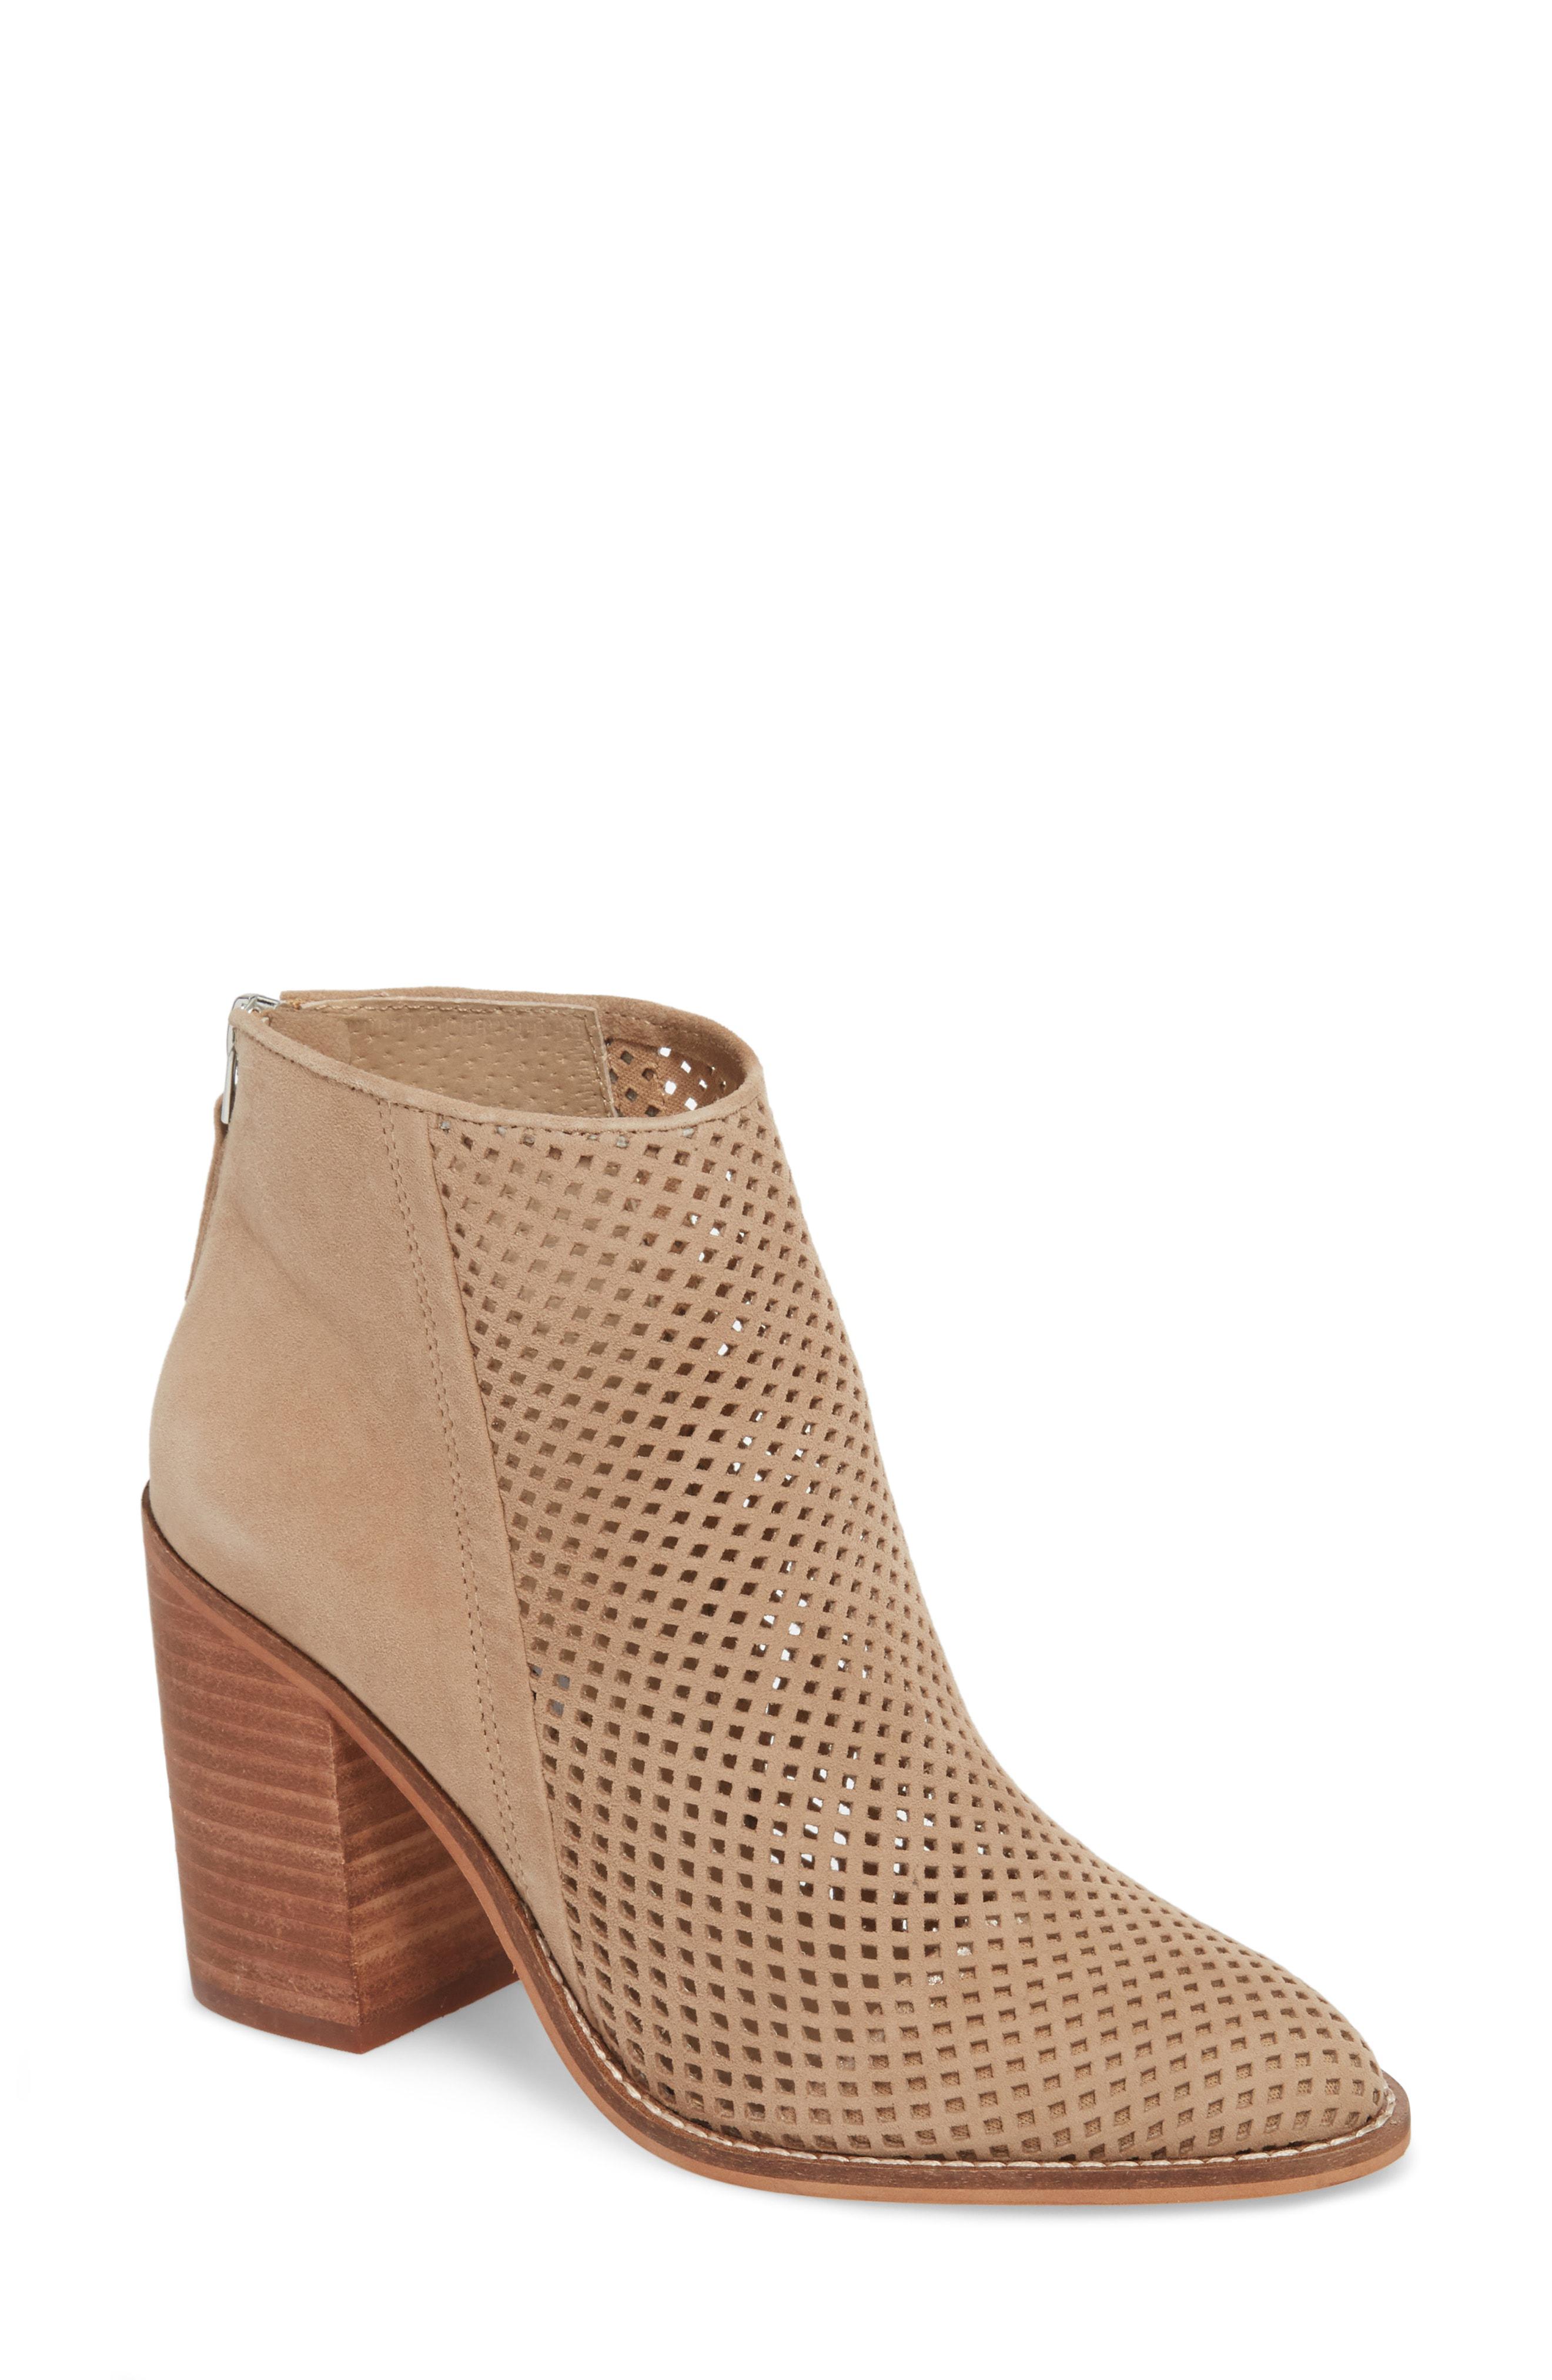 Steve Madden Rumble Perforated Bootie 